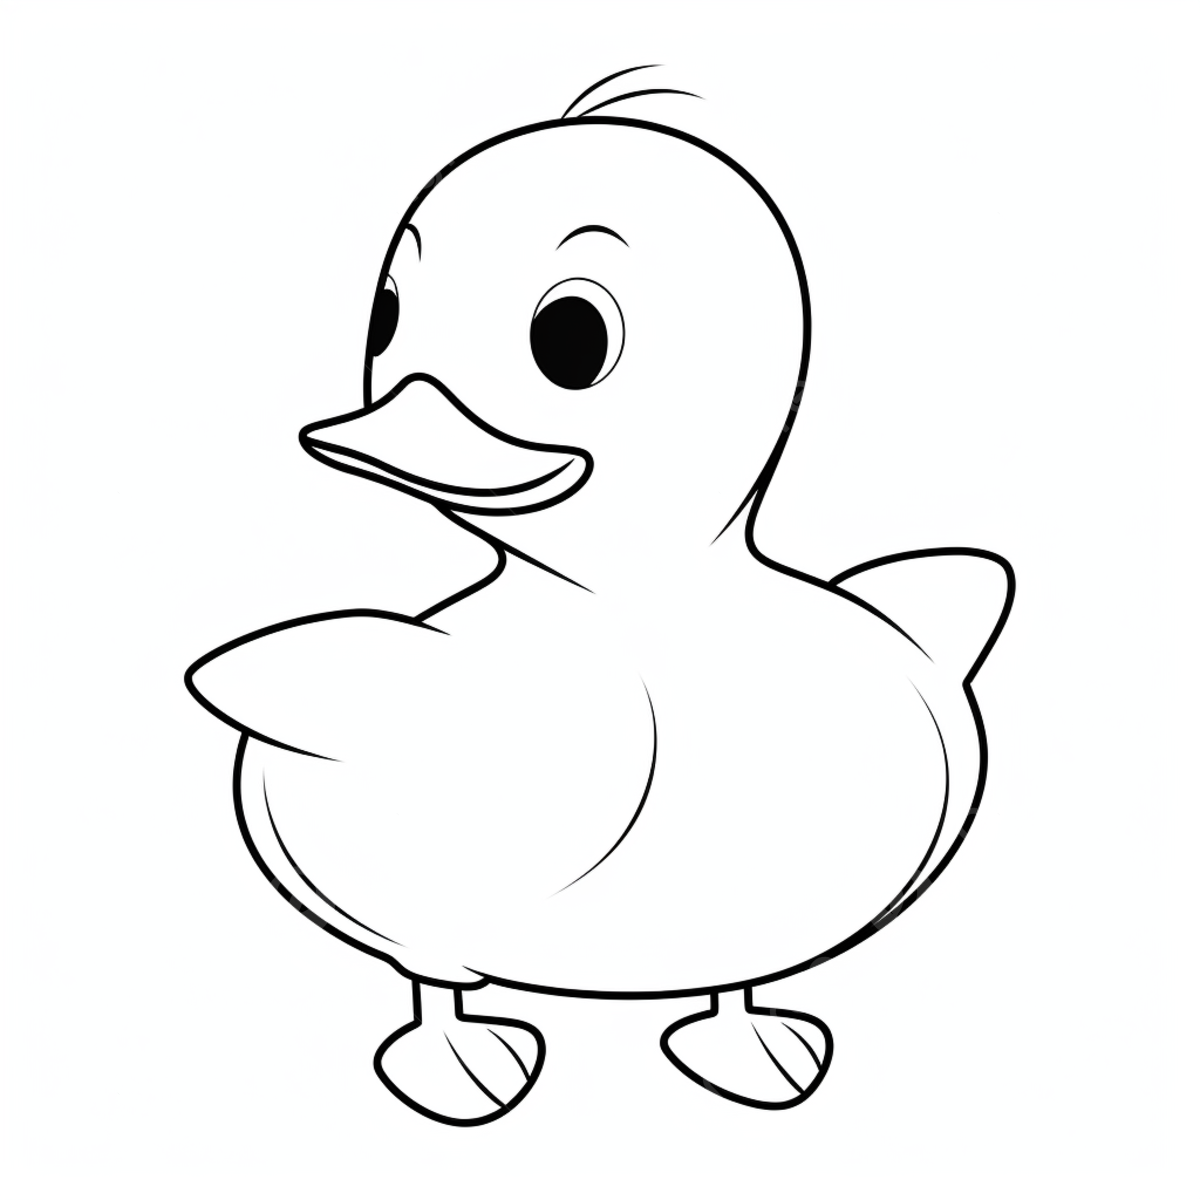 Simple rubber duck illustration in black and white duck drawing rat drawing rubber duck drawing png transparent image and clipart for free download